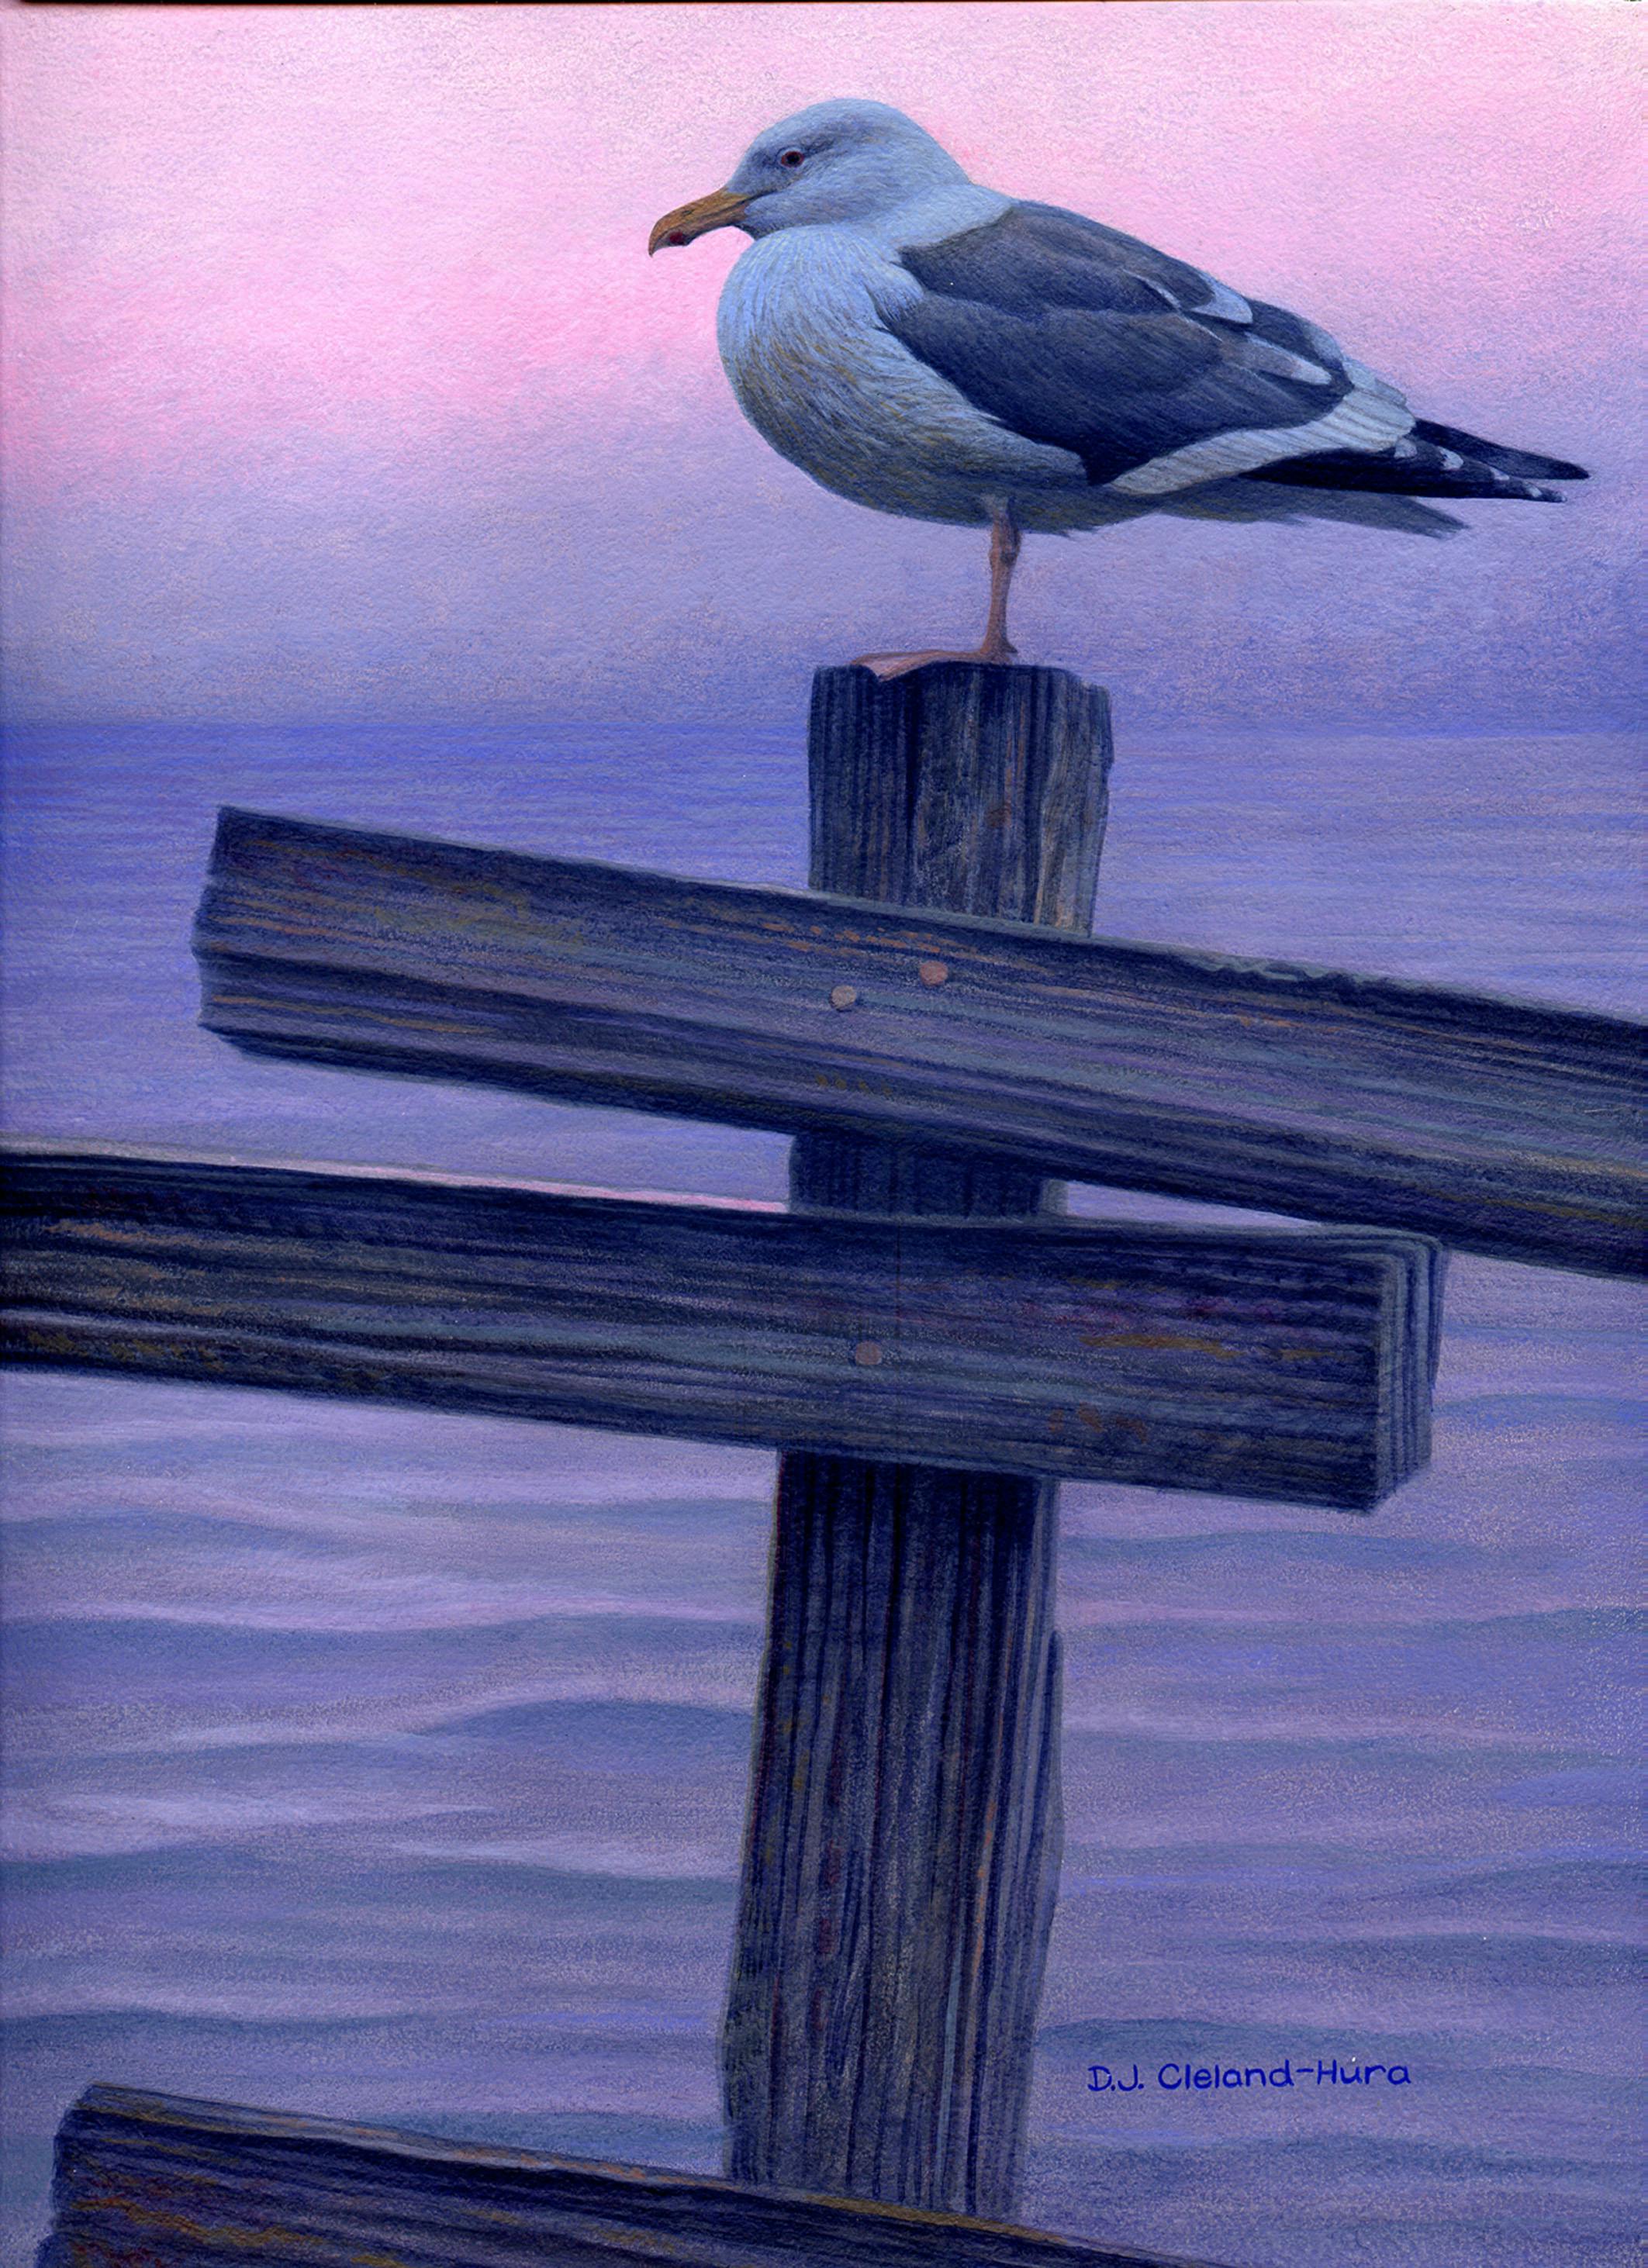 A seagull resting on a fence post